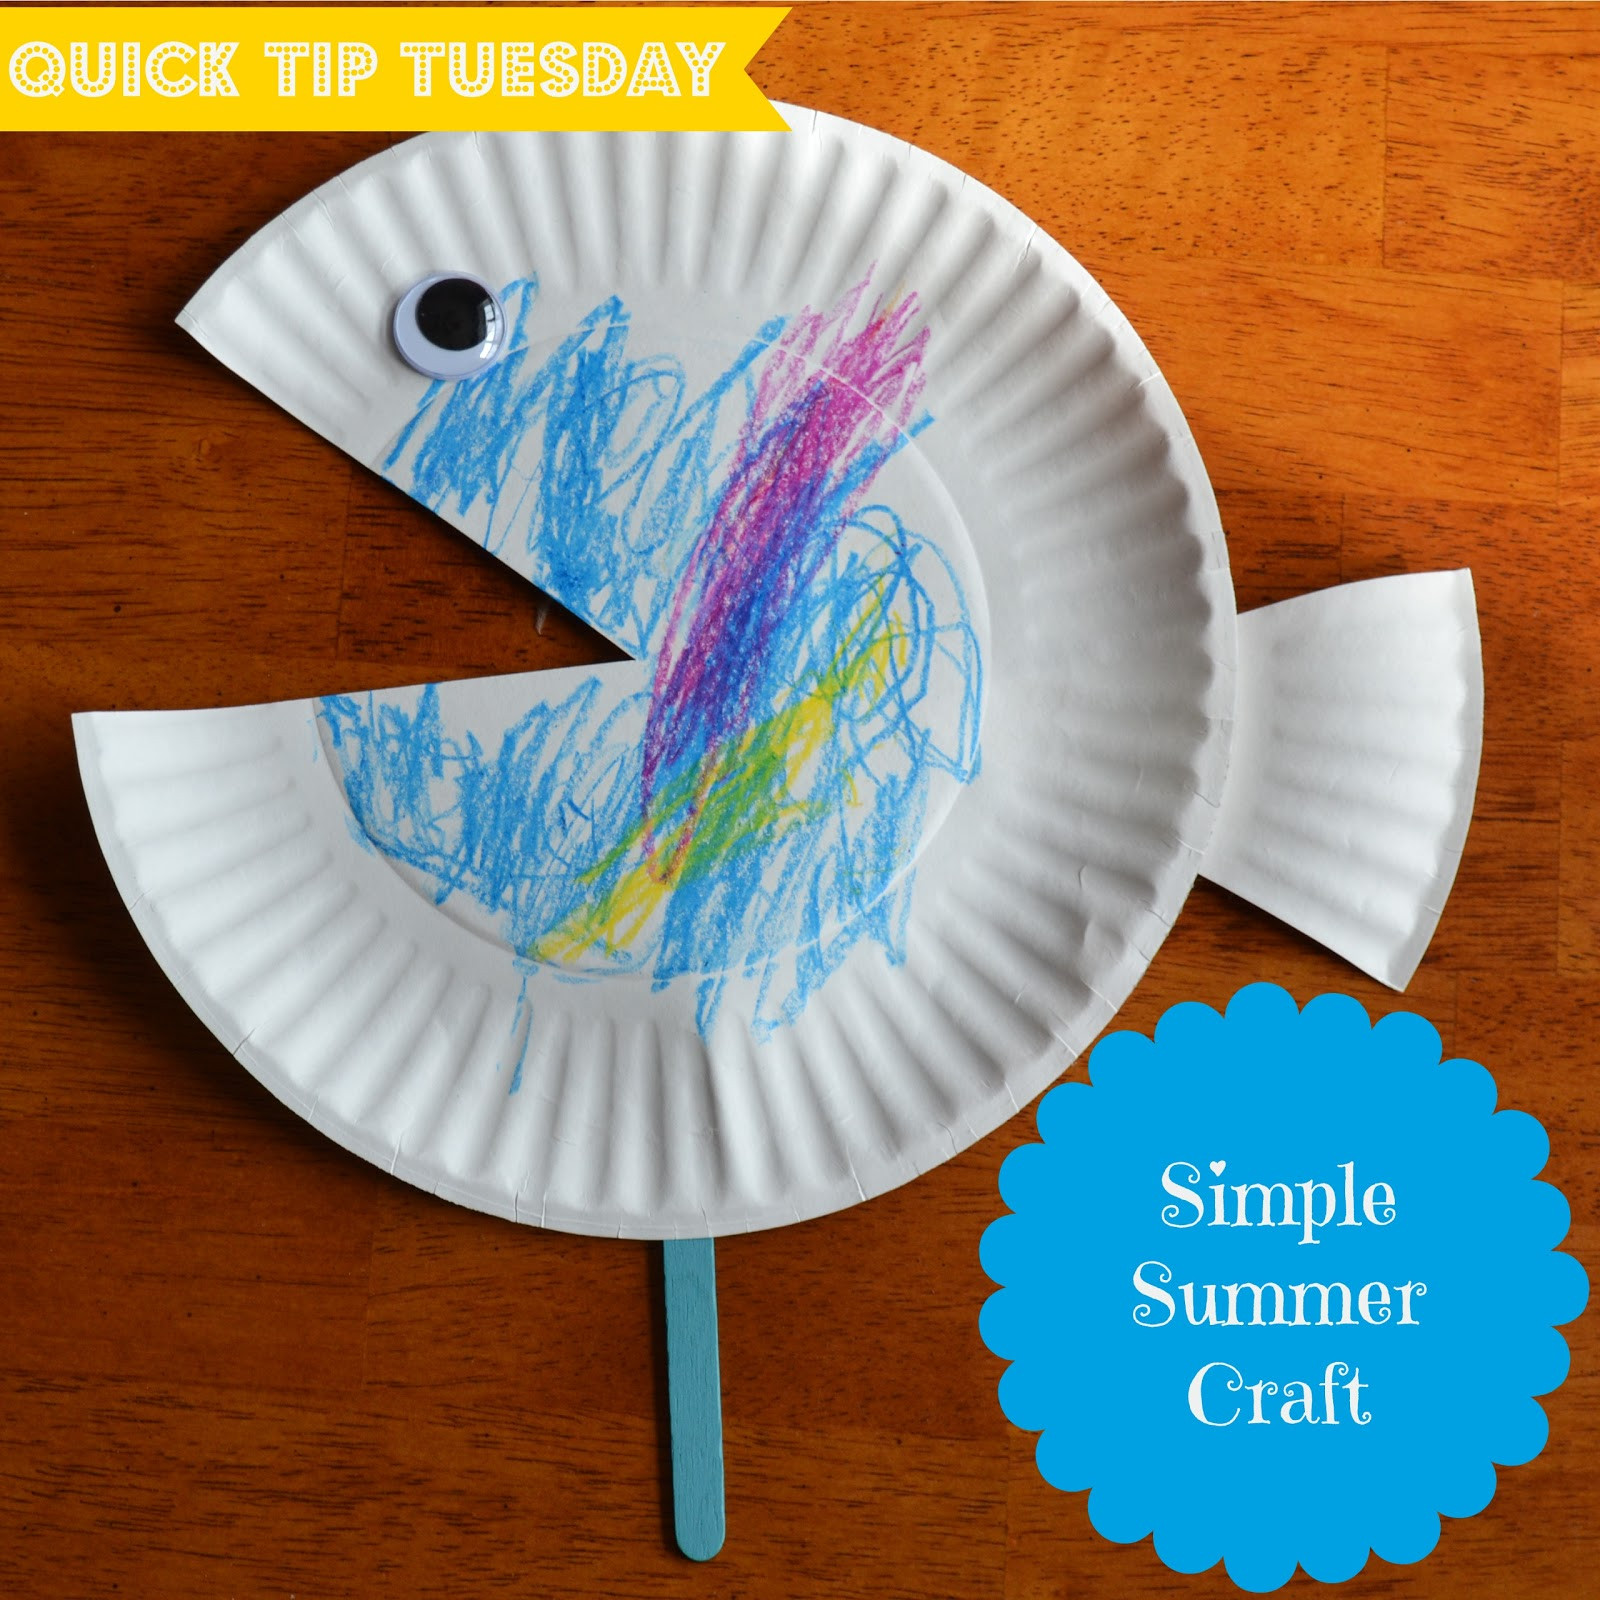 Easy Preschool Crafts
 East Coast Mommy Quick Tip Tuesday 5 Simple Summer Craft